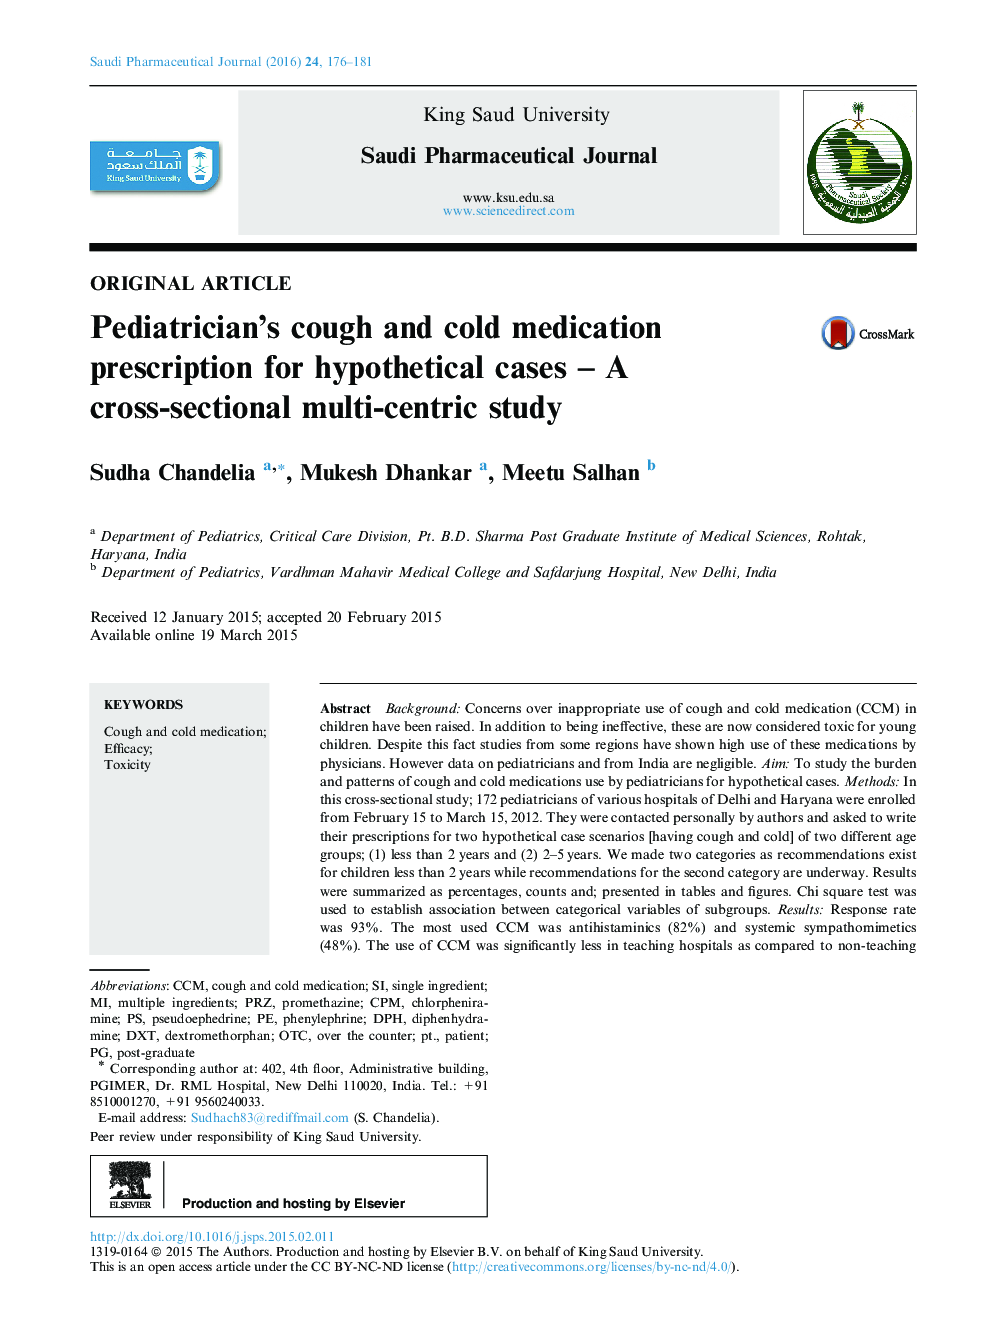 Pediatrician’s cough and cold medication prescription for hypothetical cases – A cross-sectional multi-centric study 